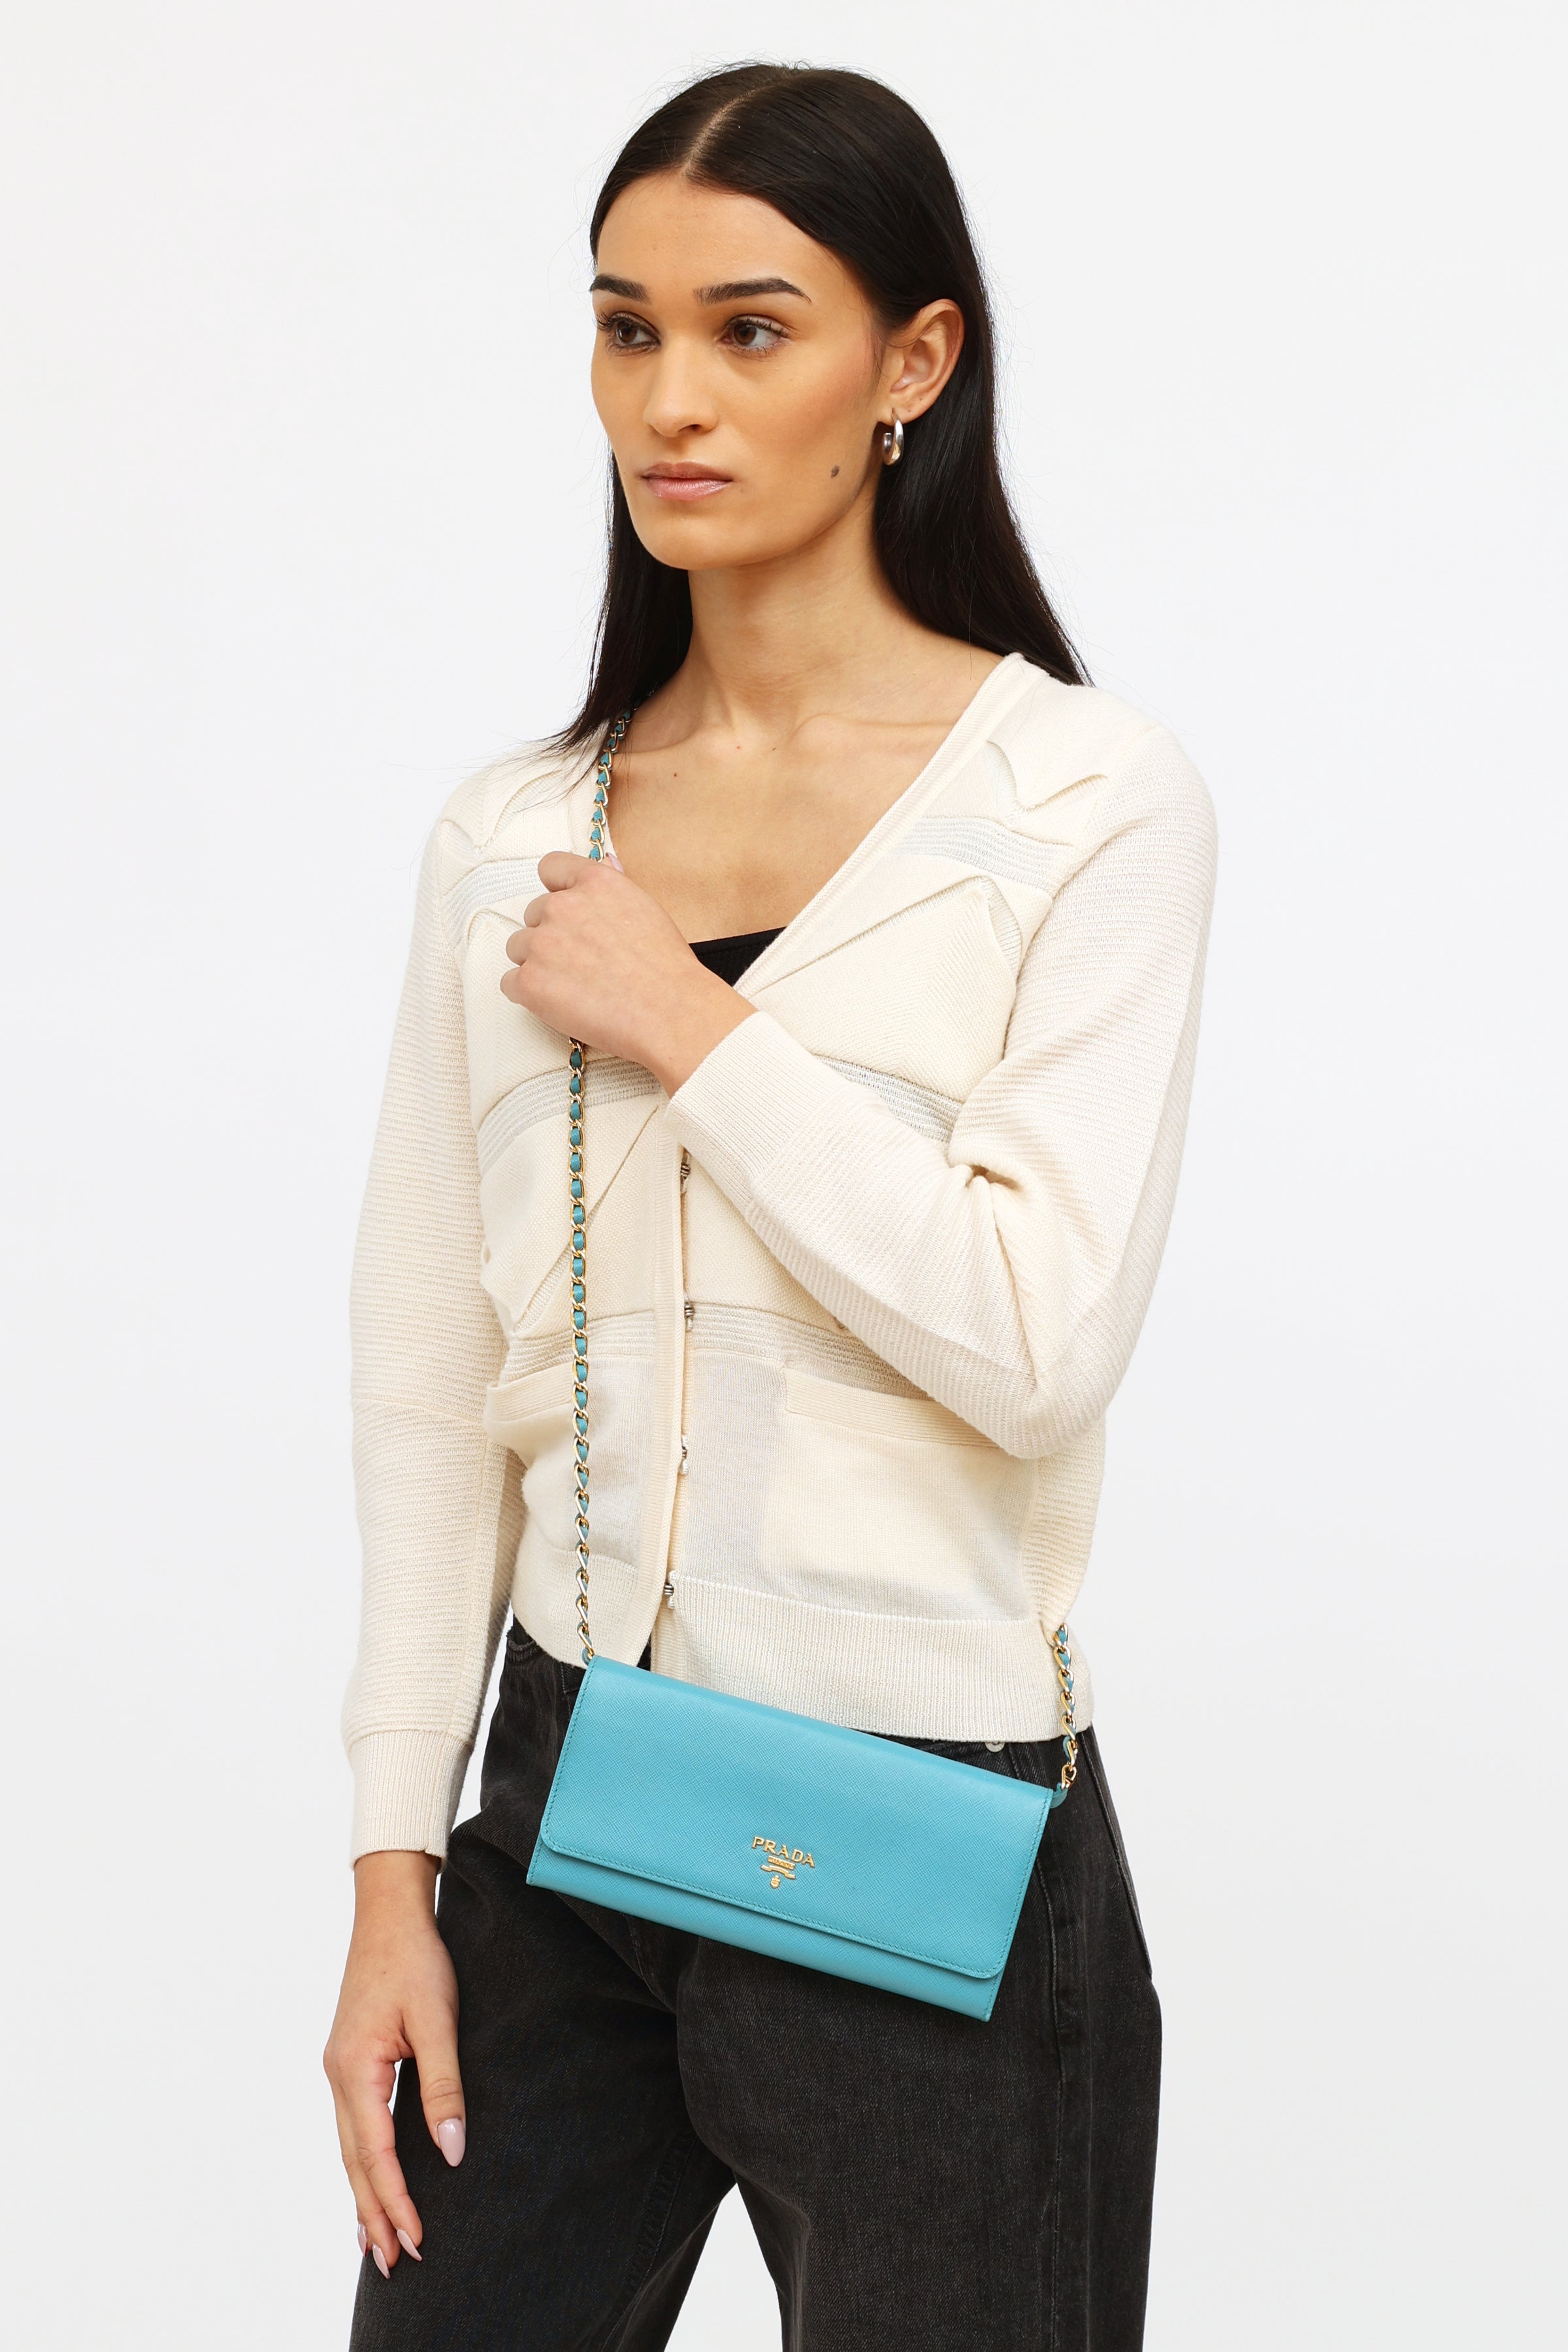 Prada // Teal Saffiano Flap Wallet On Chain – VSP Consignment